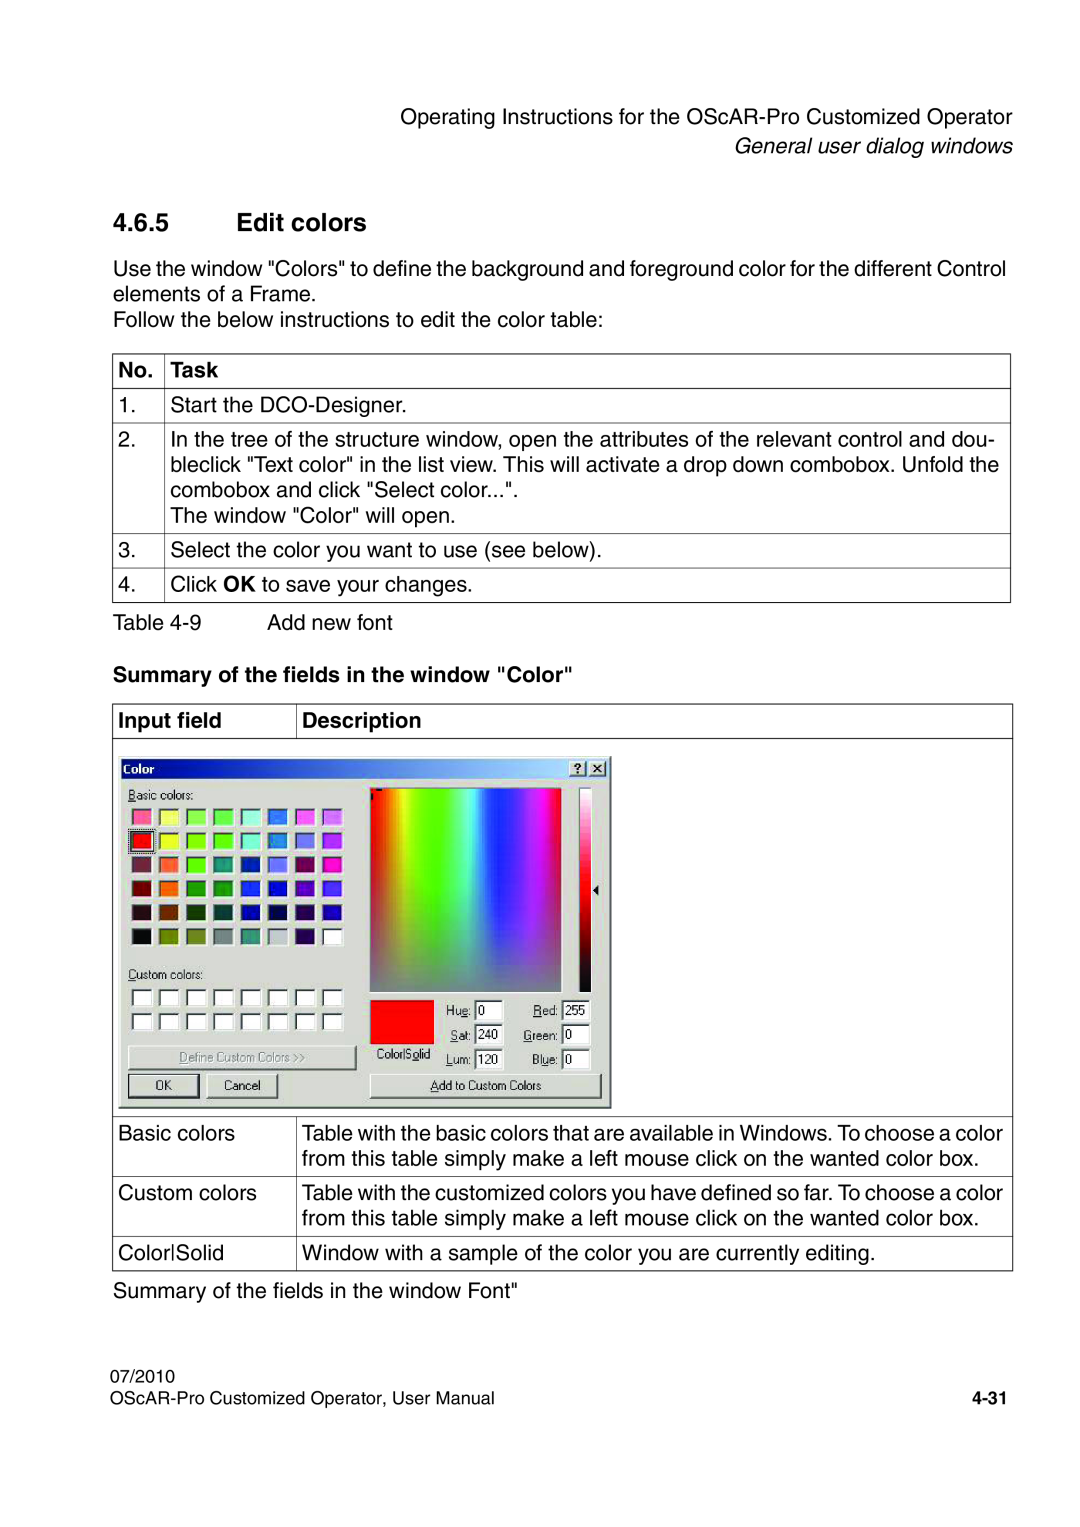 Siemens A31003-51730-U103-7619 4.6.5Edit colors, Summary of the fields in the window Color, General user dialog windows 